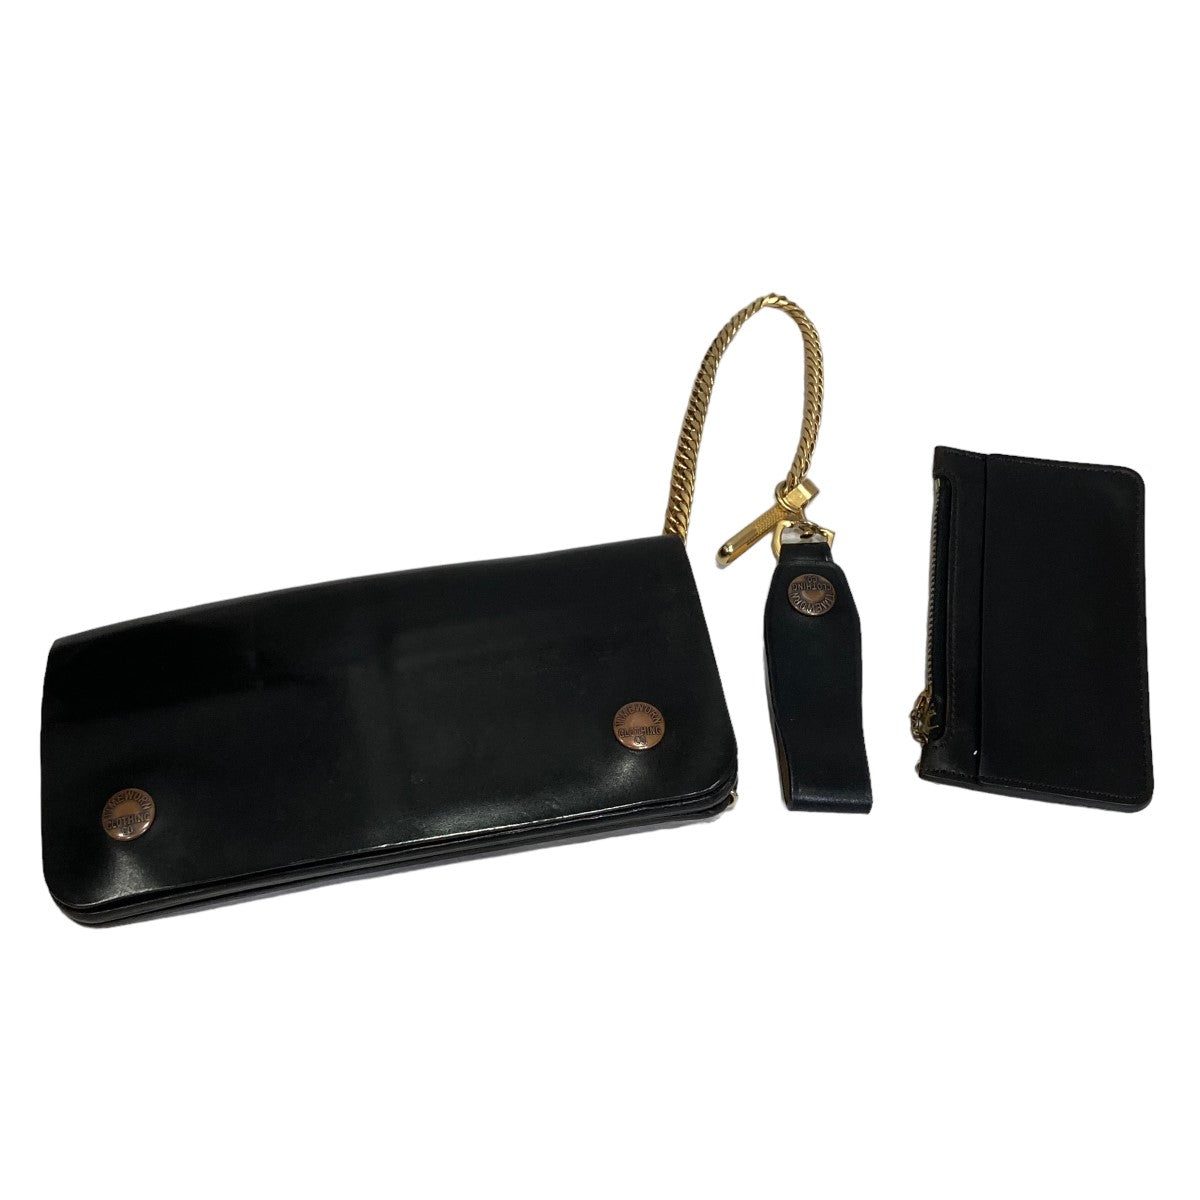 TIMEWORN CLOTHING At LAST＆CO(タイムウォーンクロージング アットラスト) 「BUTCHER PRODUCTS  CORDOVAN WALLET」 コードバンチェーンウォレット